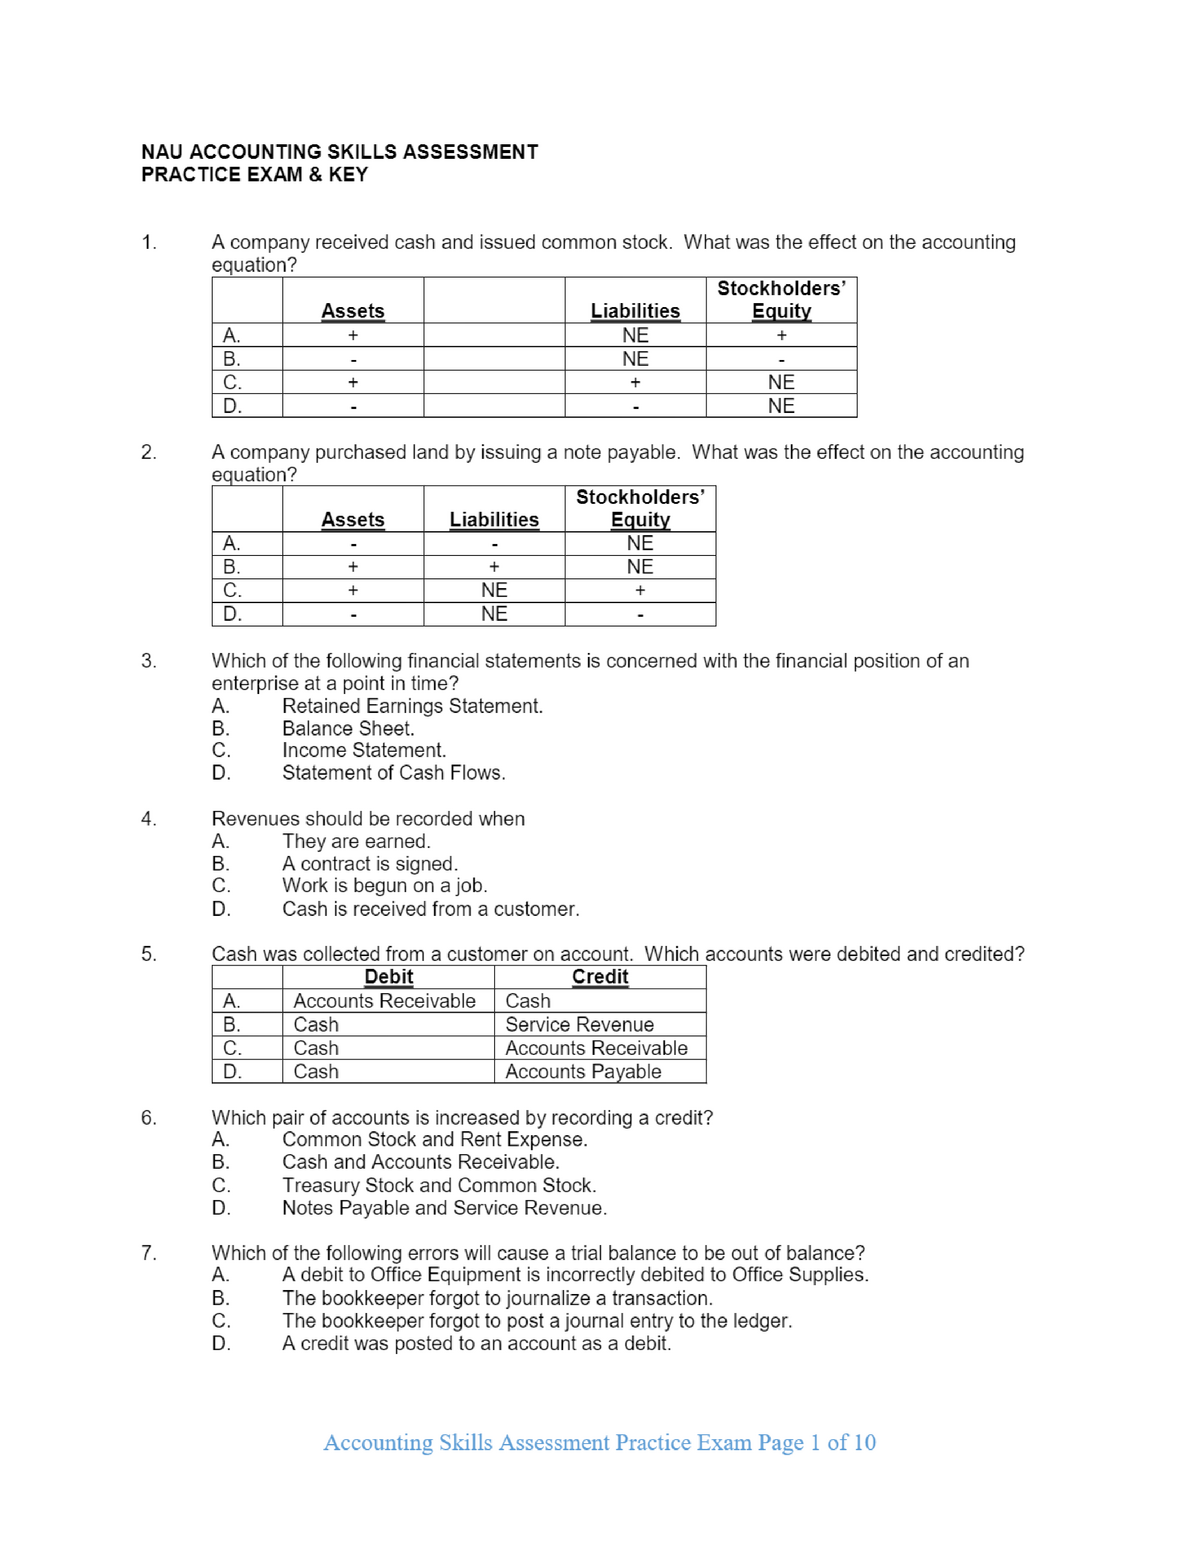 accounting-skills-assessment-practice-exam-page-1-of-10-pdf-accounting-principles-studocu